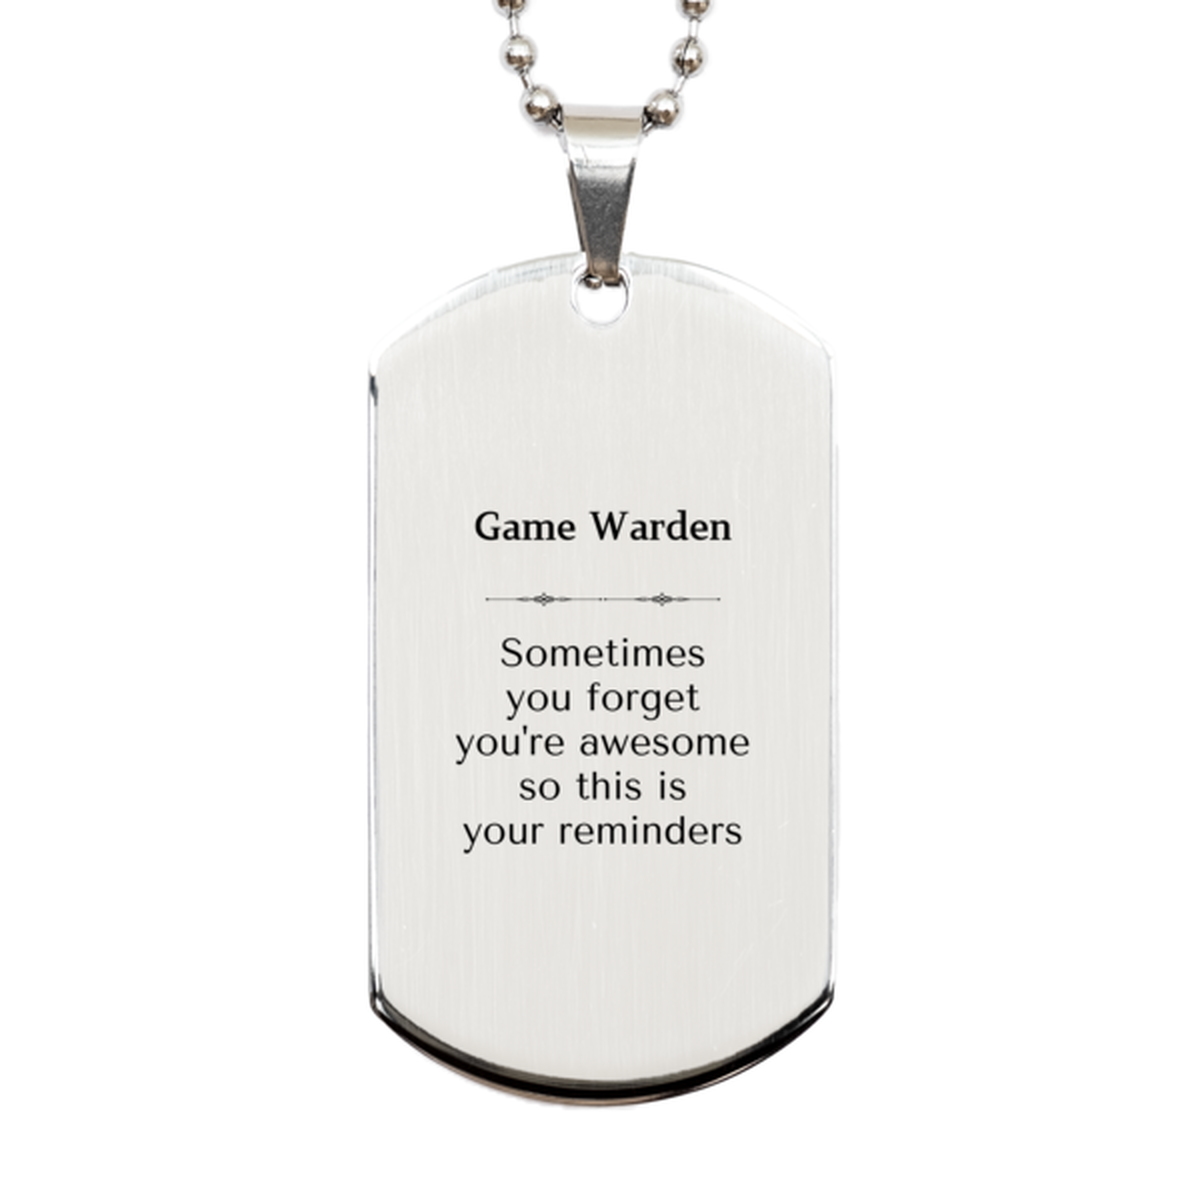 Sentimental Game Warden Silver Dog Tag, Game Warden Sometimes you forget you're awesome so this is your reminders, Graduation Christmas Birthday Gifts for Game Warden, Men, Women, Coworkers